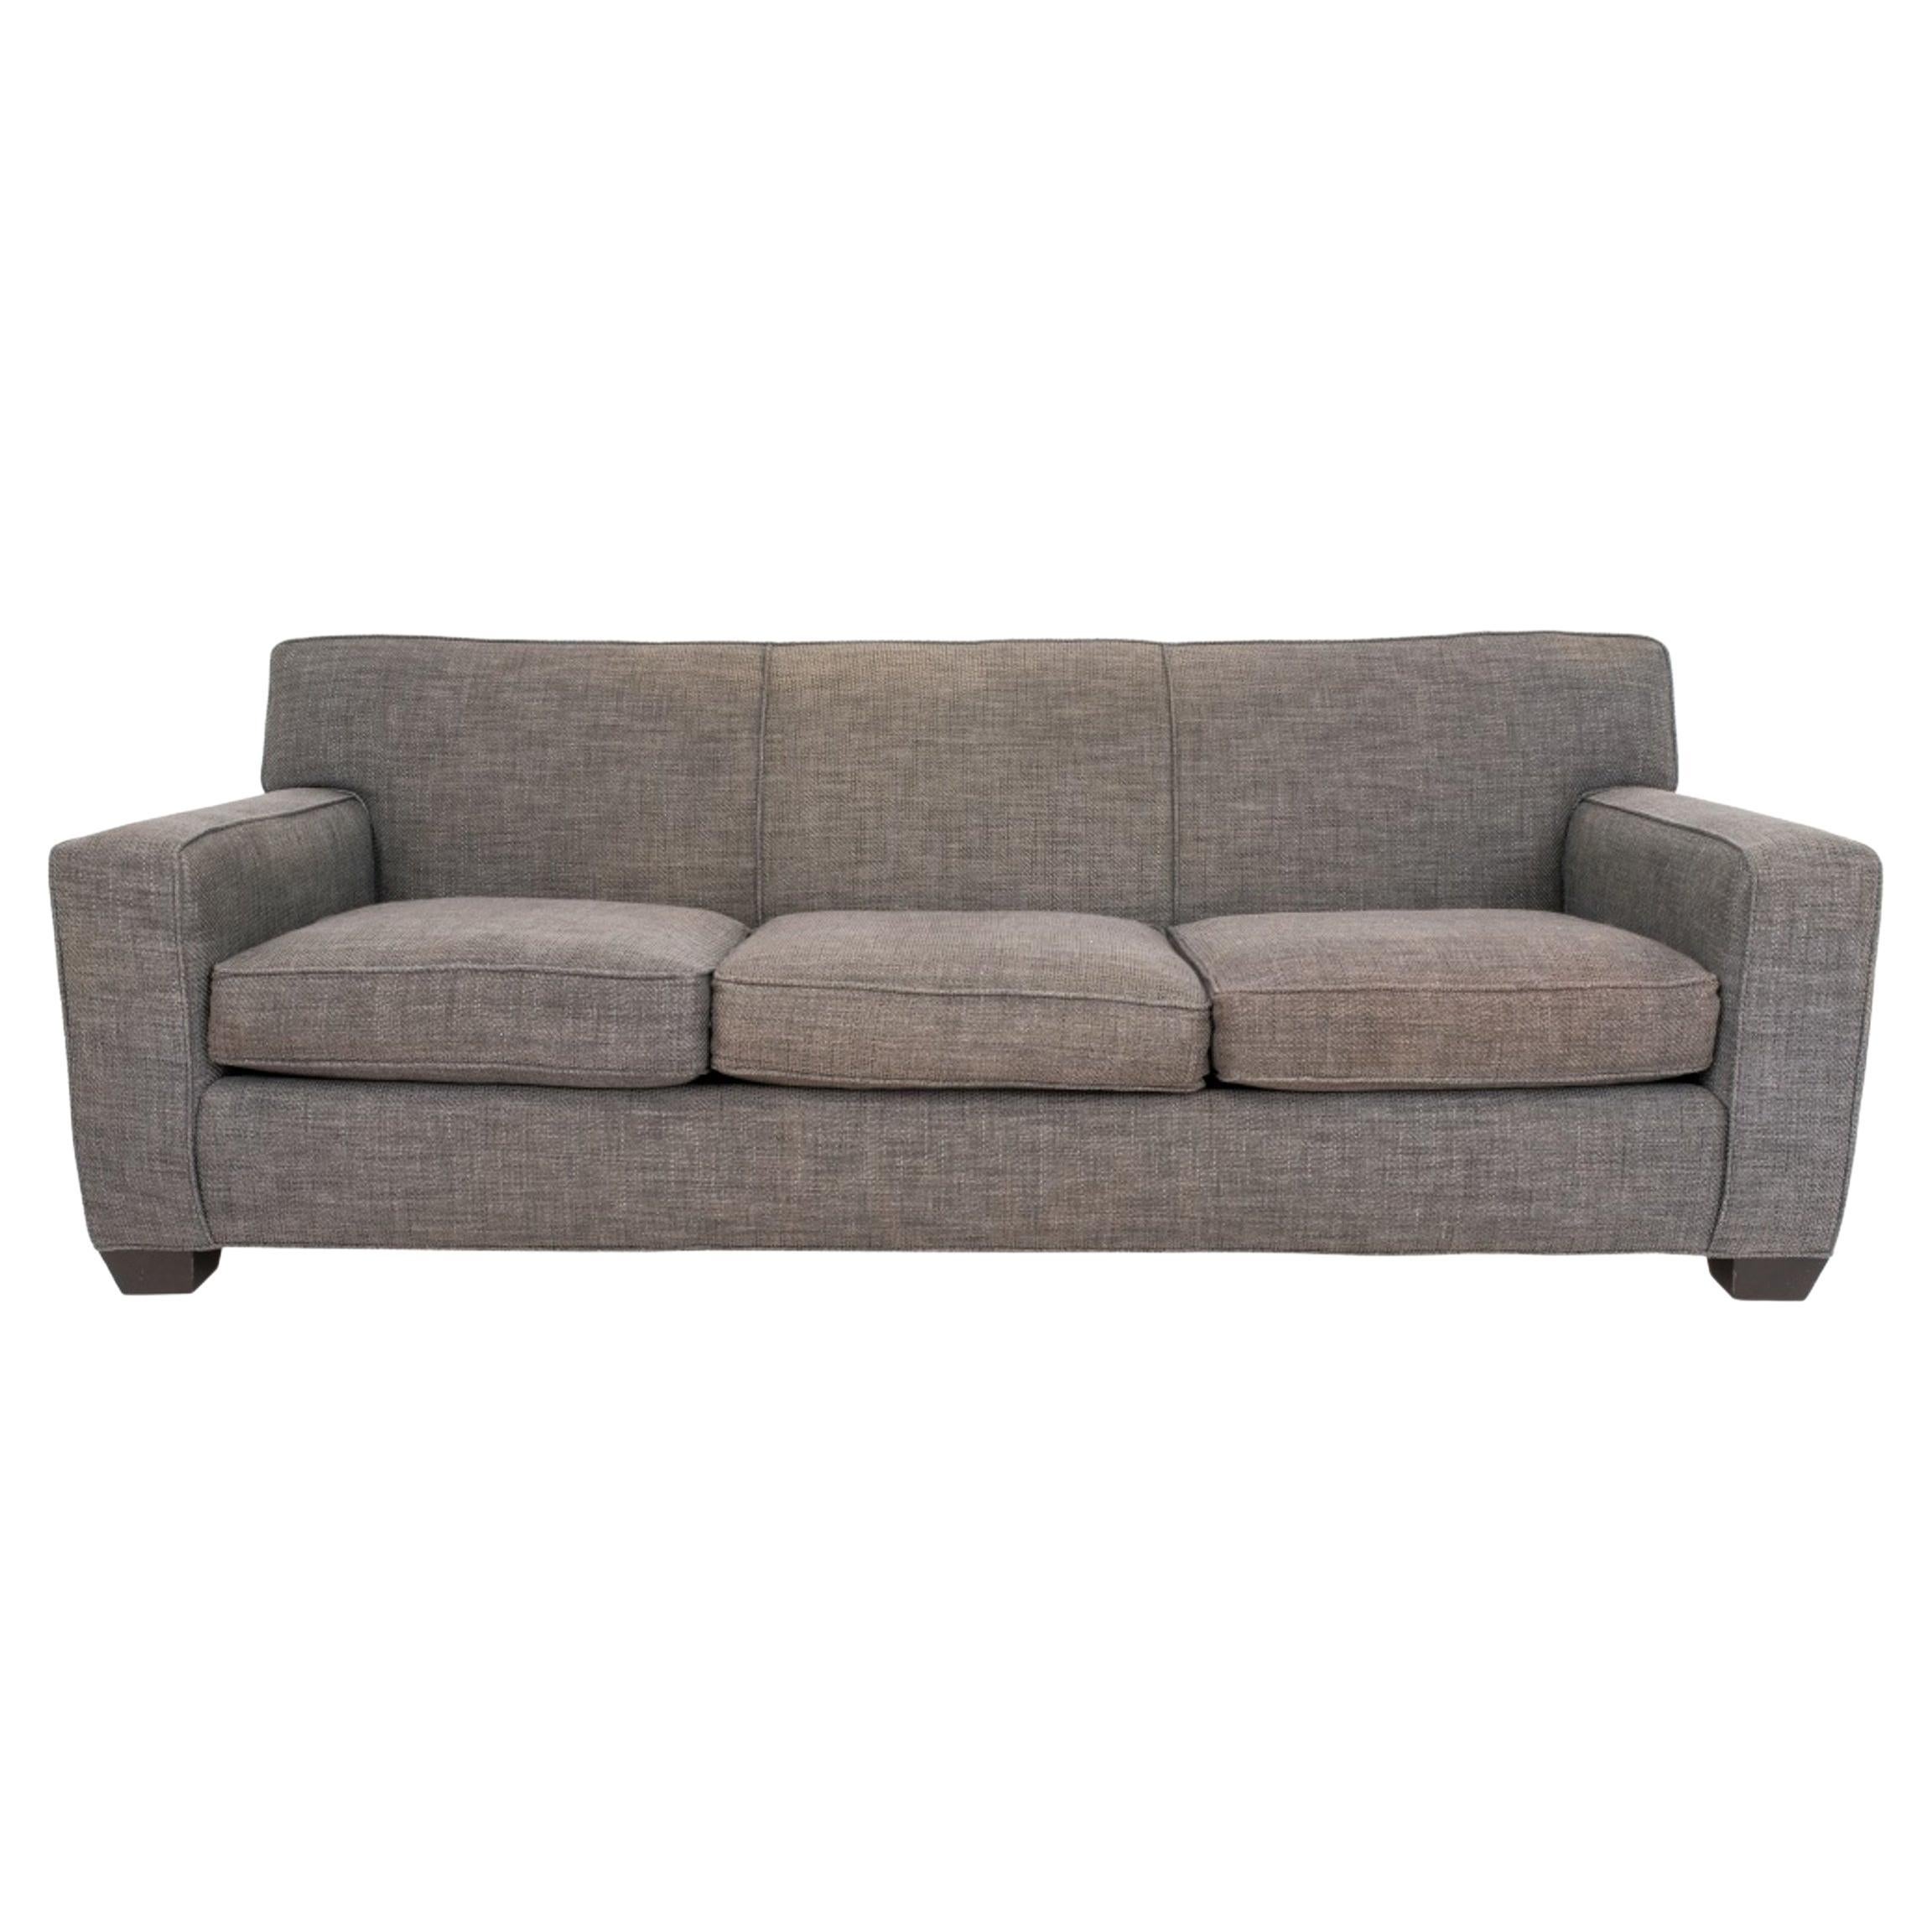 Chenille Upholstered Three Seater Sofa For Sale